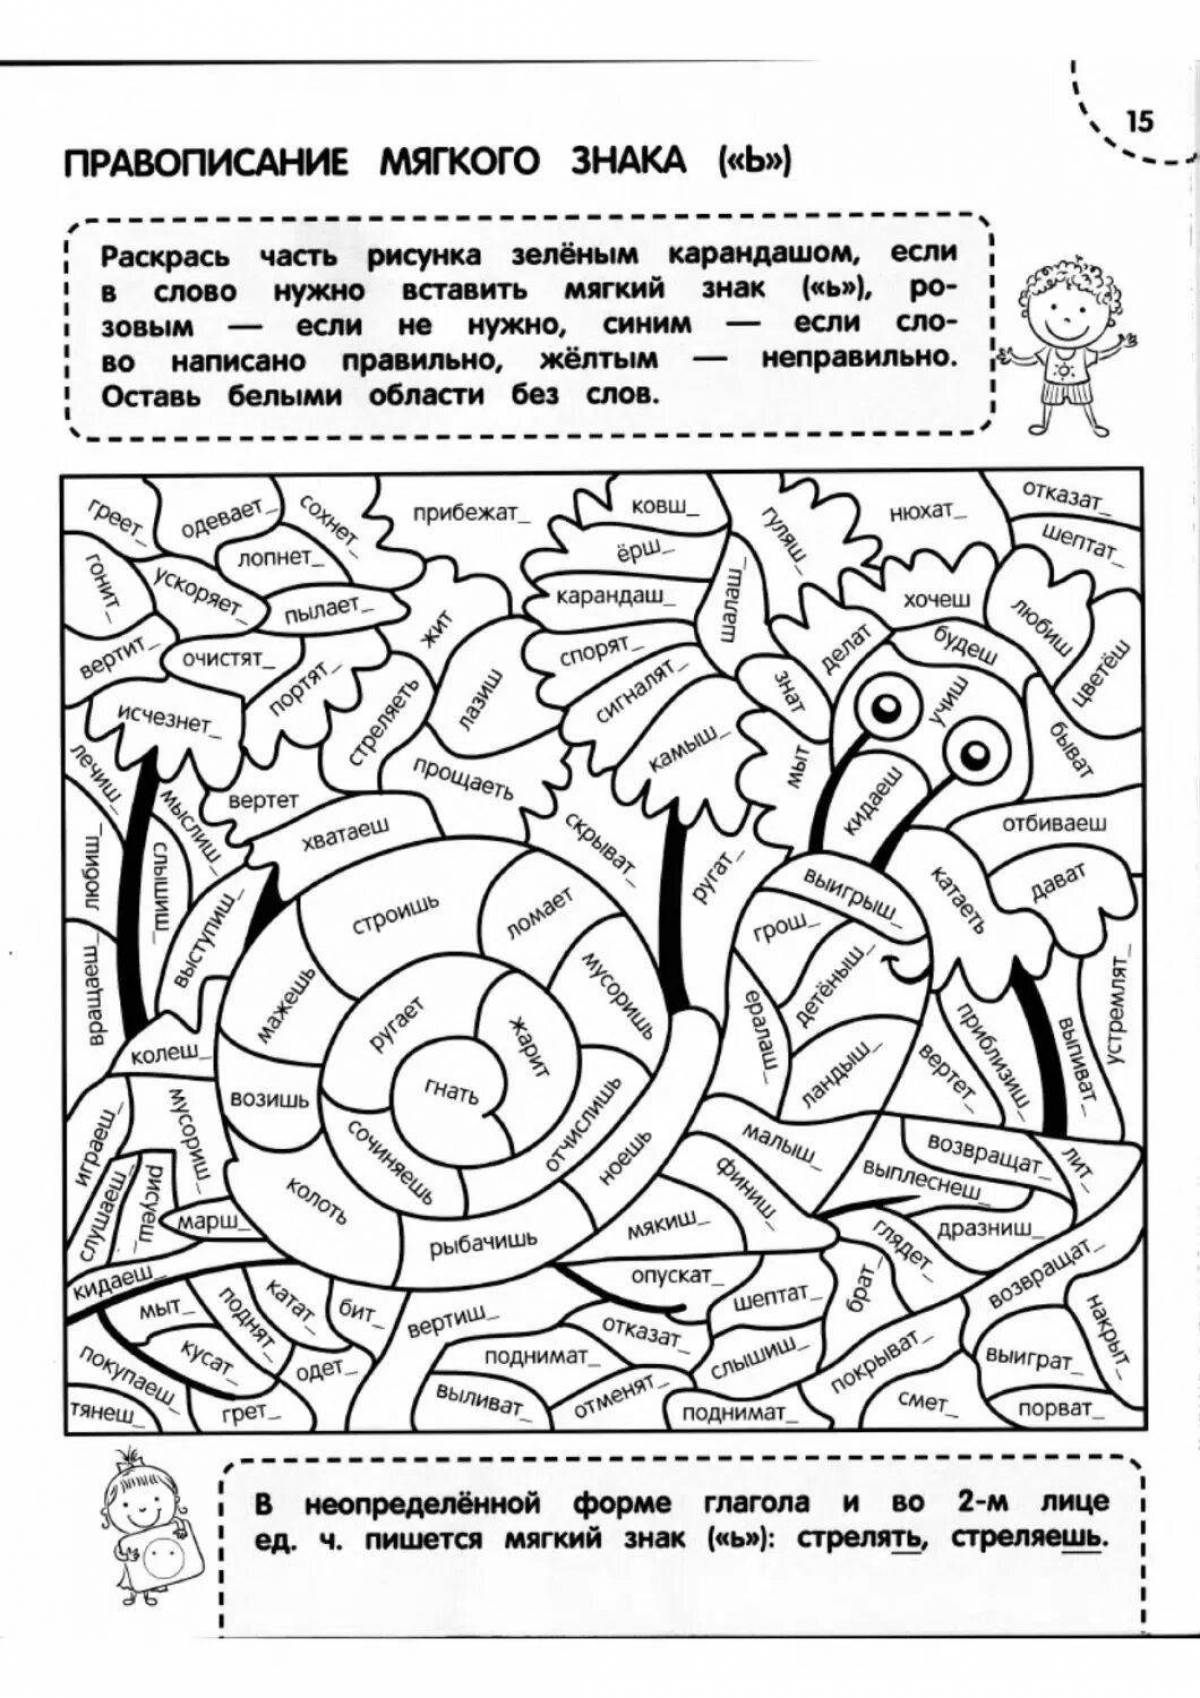 6th class strike simulator coloring page